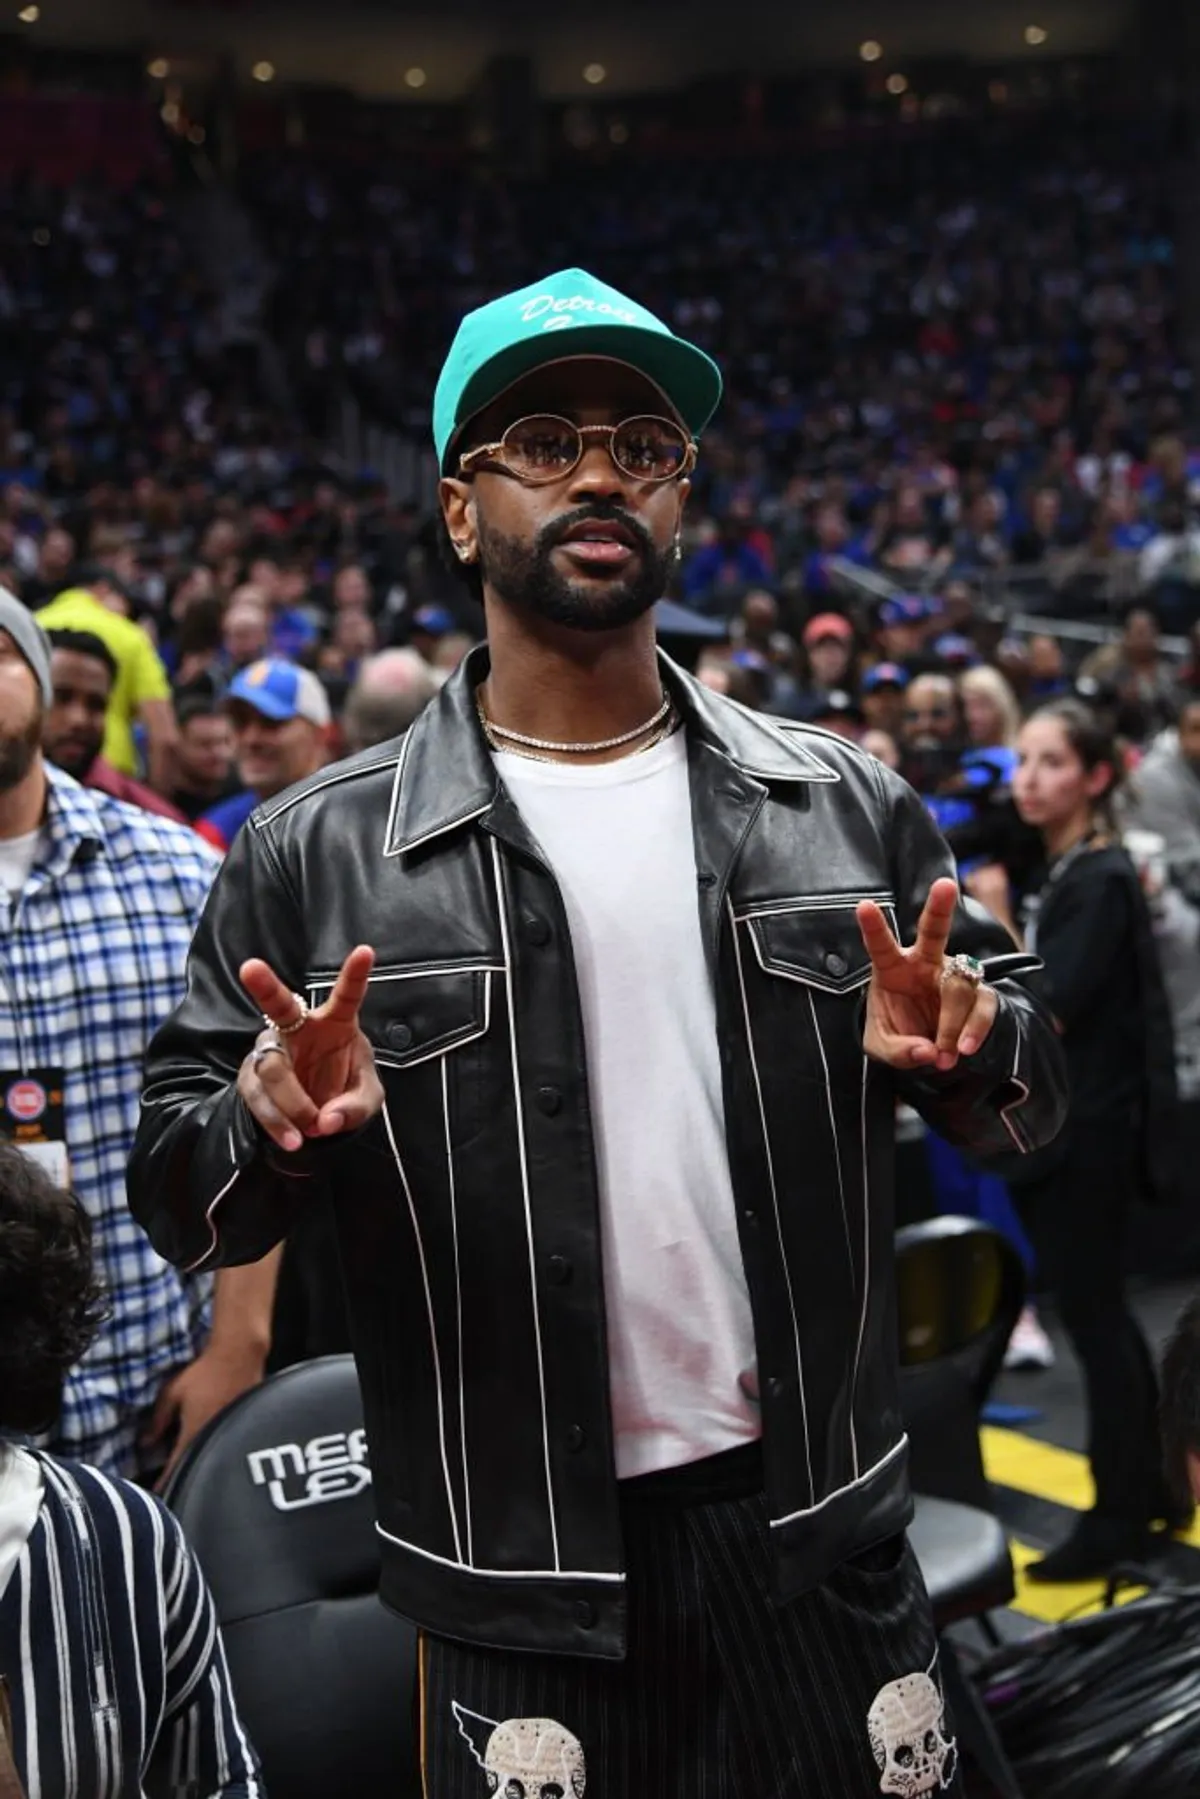 Big Sean poses for a photo before the Atlanta Hawks vs. Detroit Pistons game on October 24, 2019. | Photo: Getty Images